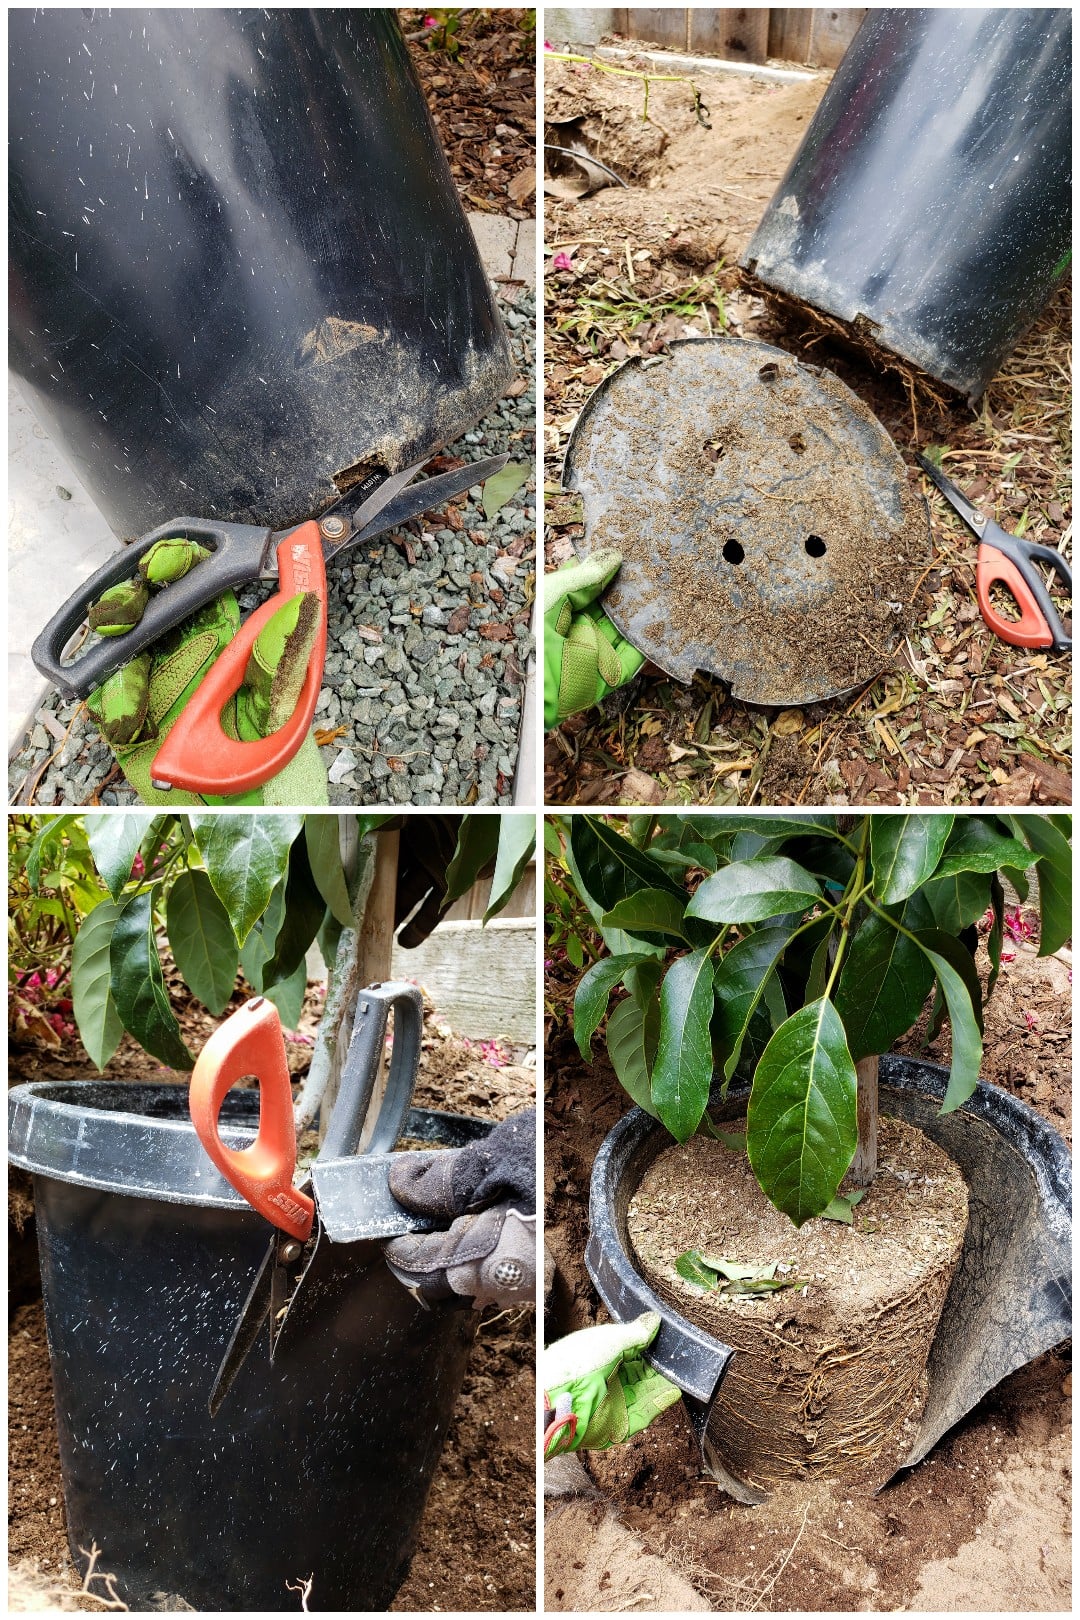 A four way image collage of how to easily remove a nursery pot from a large, root bound tree. The first image shows a pair of scissors starting to cut along the bottom side of the nursery pot. The second image shows the bottom of the nursery pot cut out, the circular plastic piece is covered in dirt and a few roots. The third image shows the scissors now cutting down the side of the pot starting from the top and working towards the bottom. The fourth image shows the pot and tree sitting in its planting hole with the side cut all the way through and somewhat falling away from the exposed root ball. From here it is easy to peel it away and pull if from the root ball. 